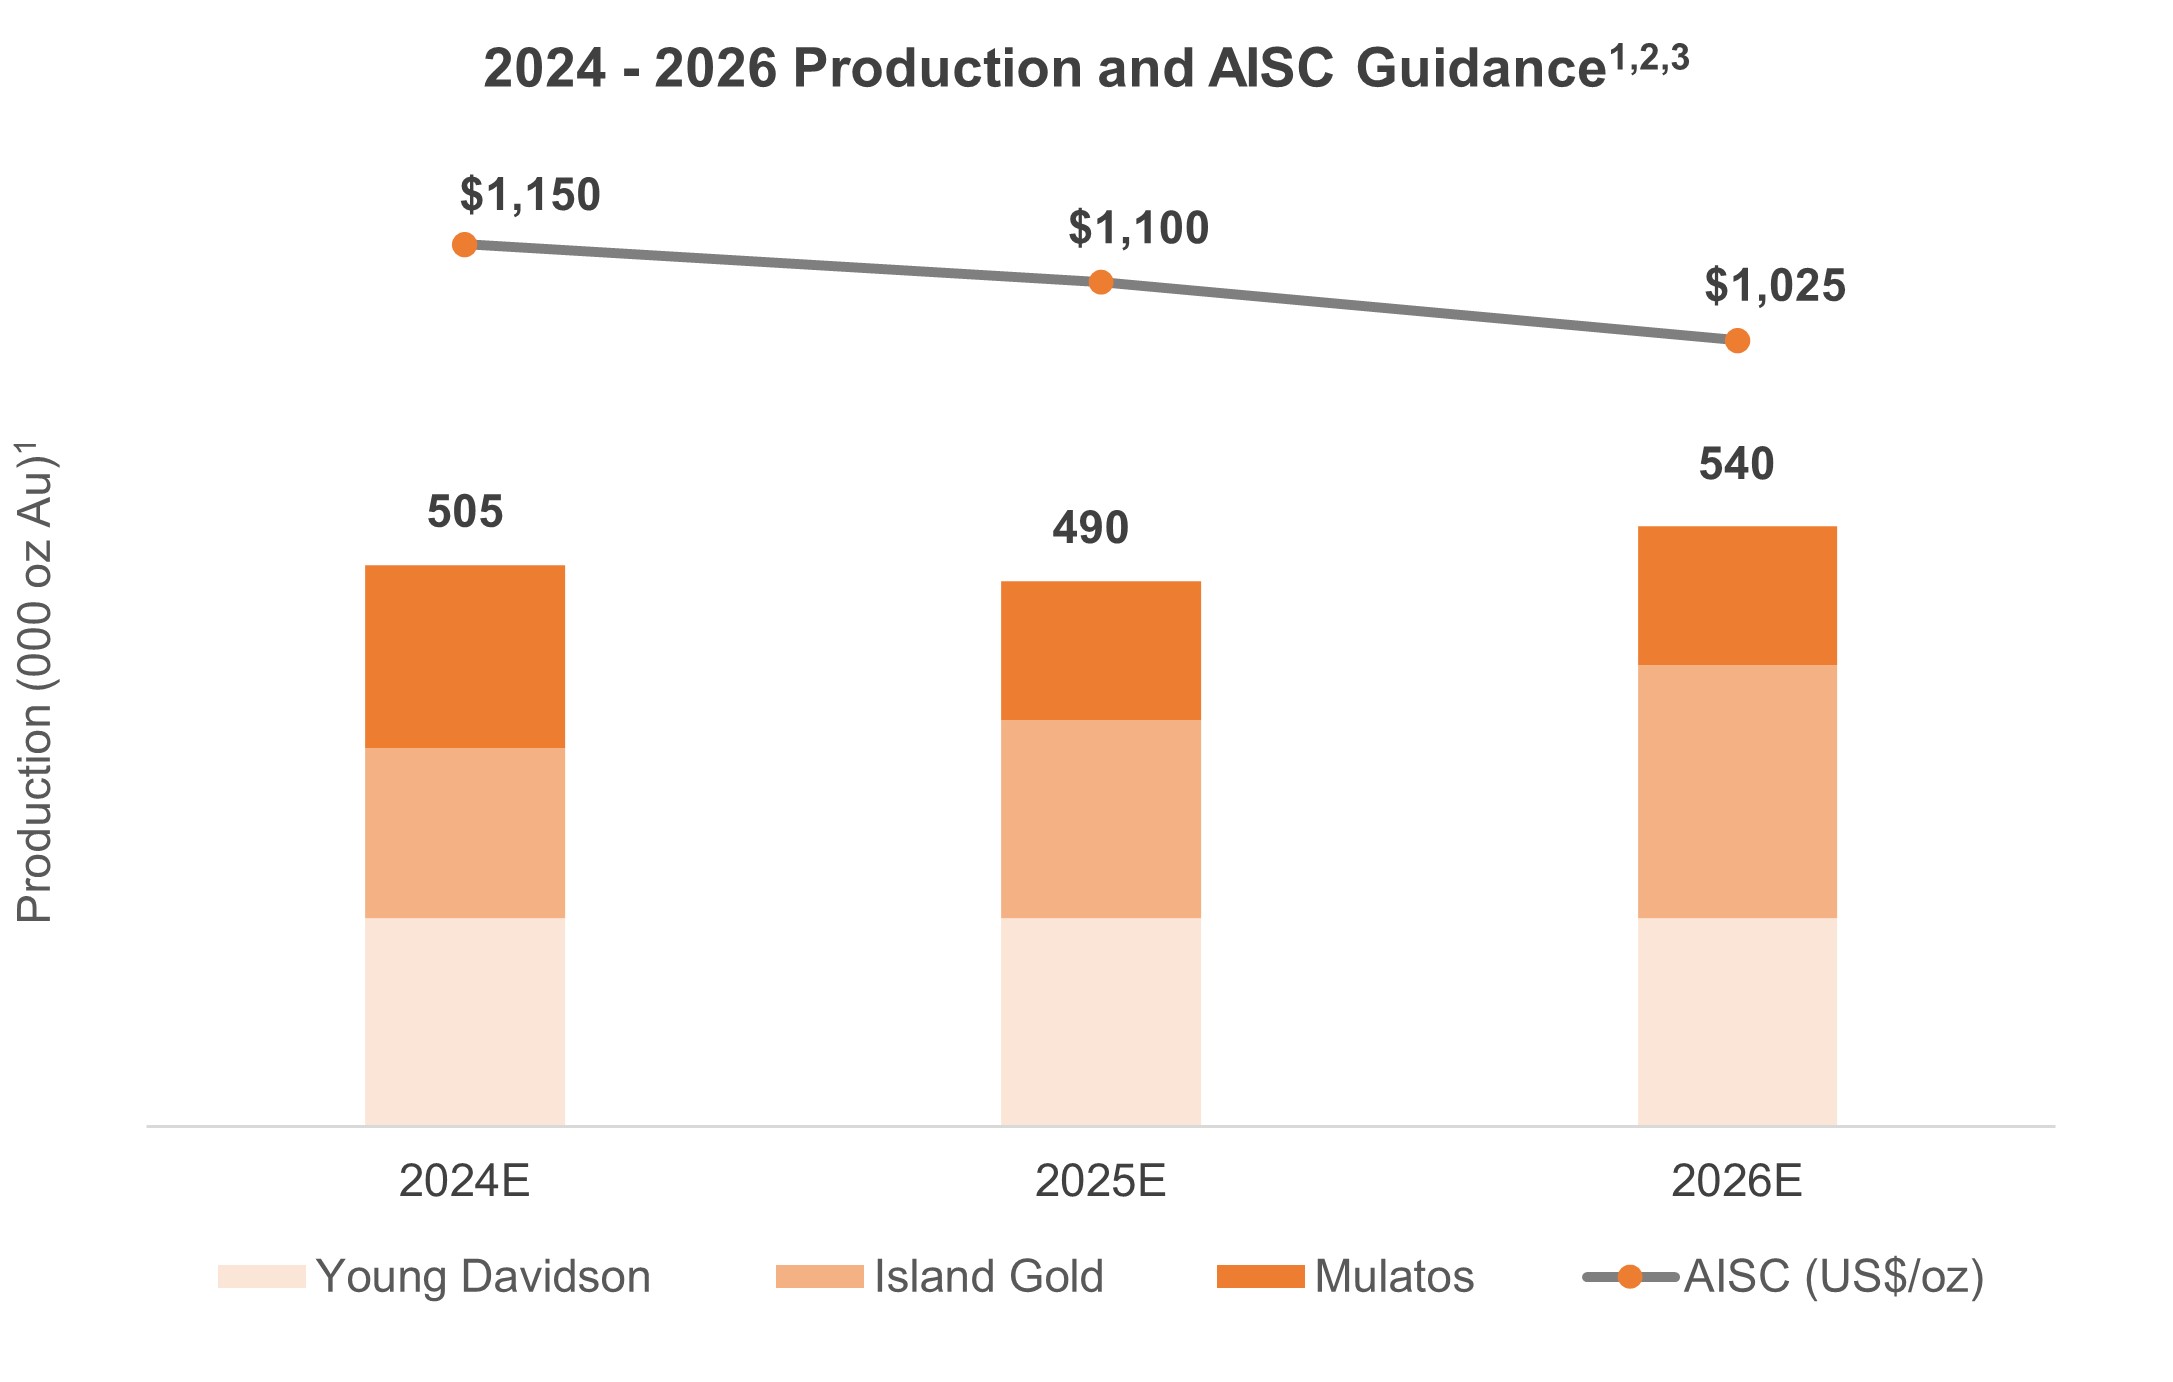 Figure 2 _ 2024 - 2026 Production and AISC Guidance